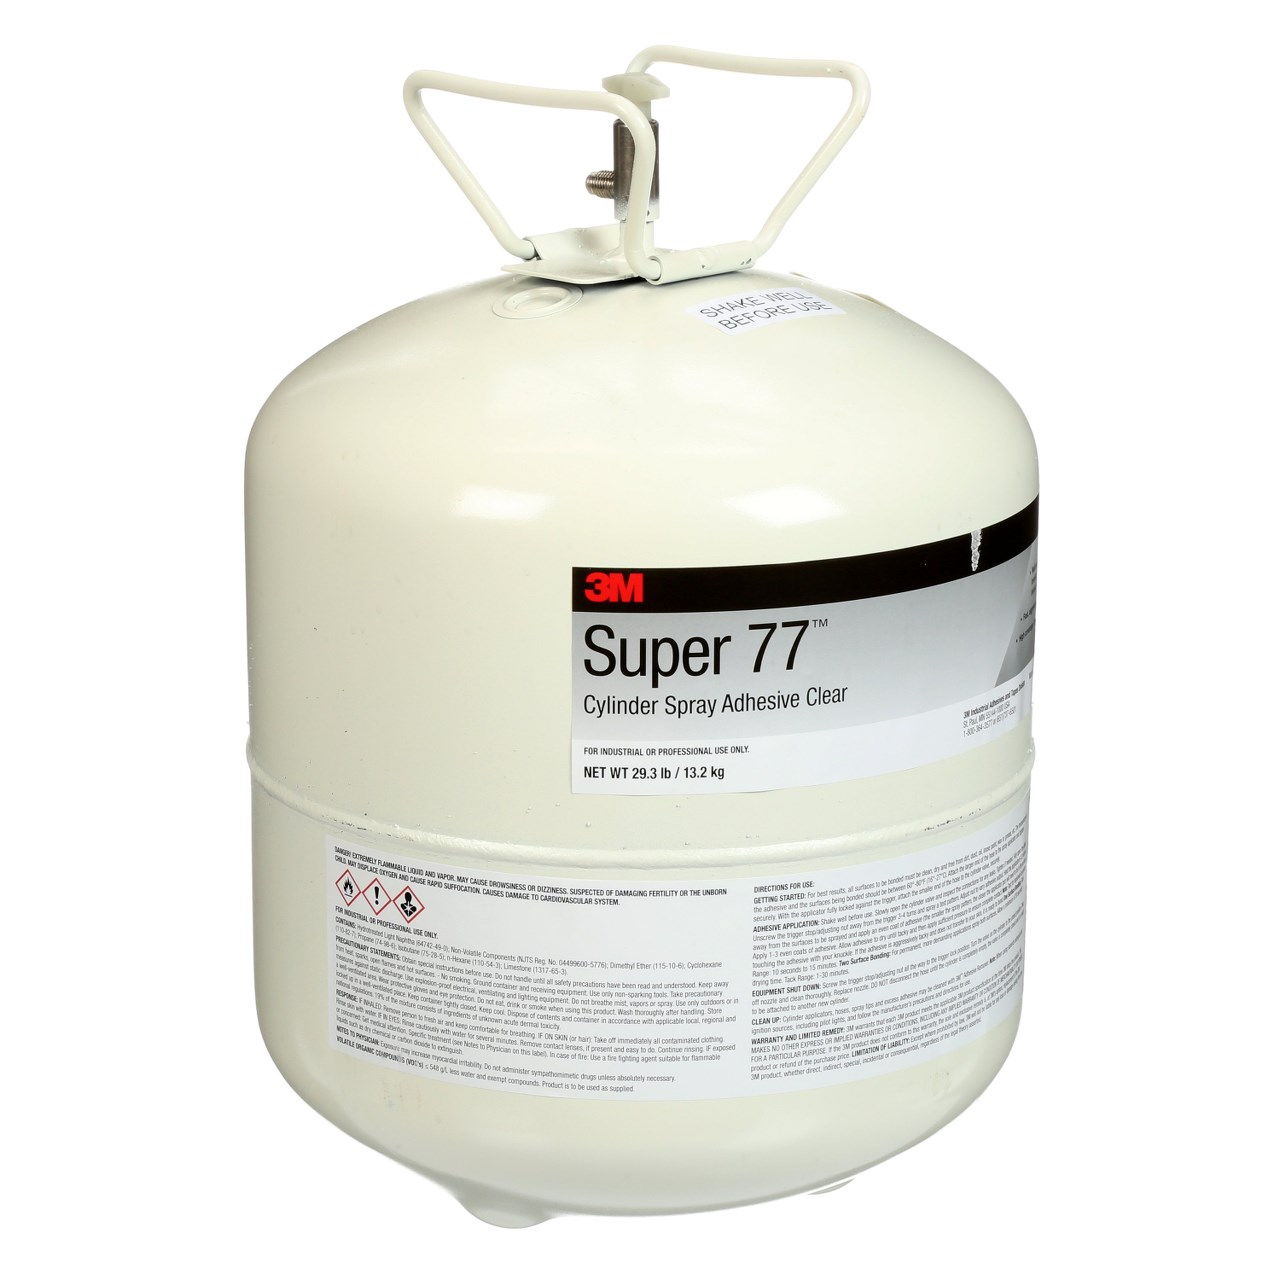 3M Super 77 Cylinder Spray Adhesive Clear, Large Cylinder (Net Wt. 29.3  lbs), 1 per case - Sabre Industrial Supplies